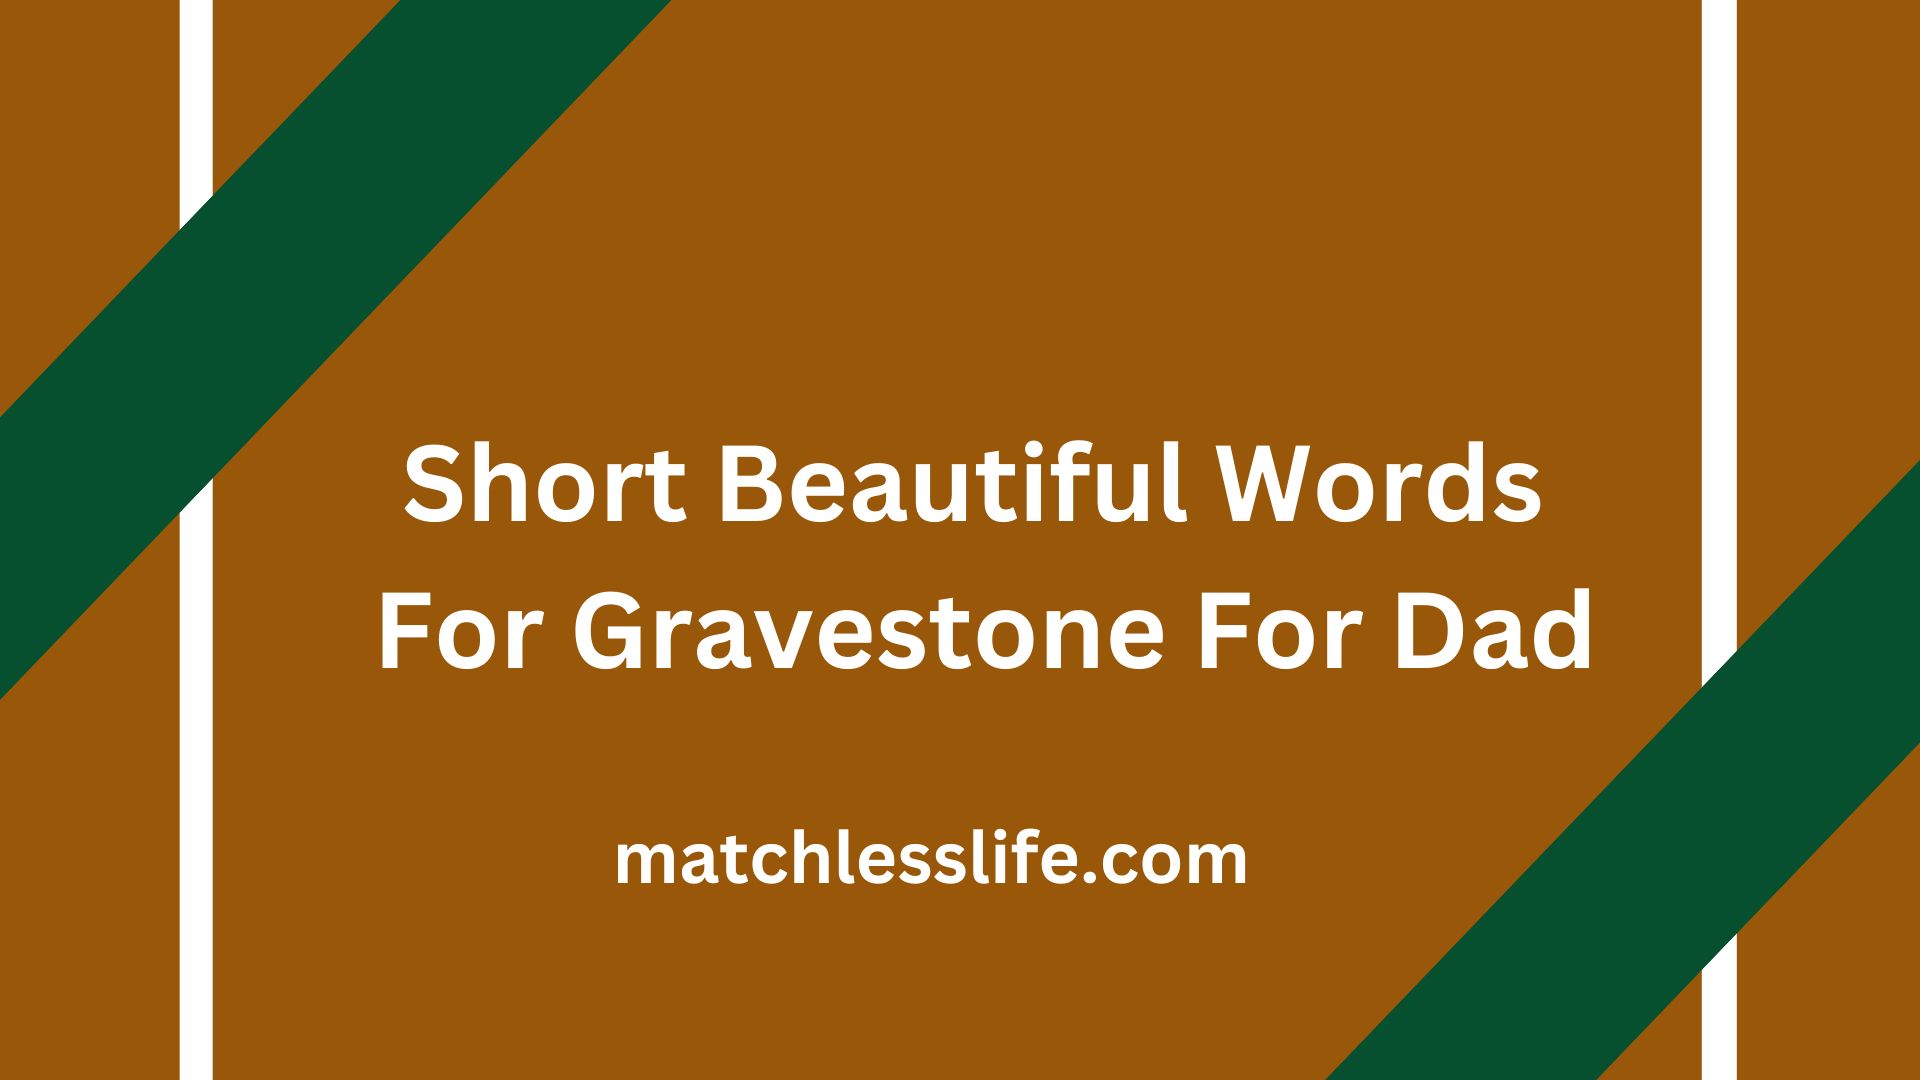 Short Beautiful Words For Gravestone For Dad